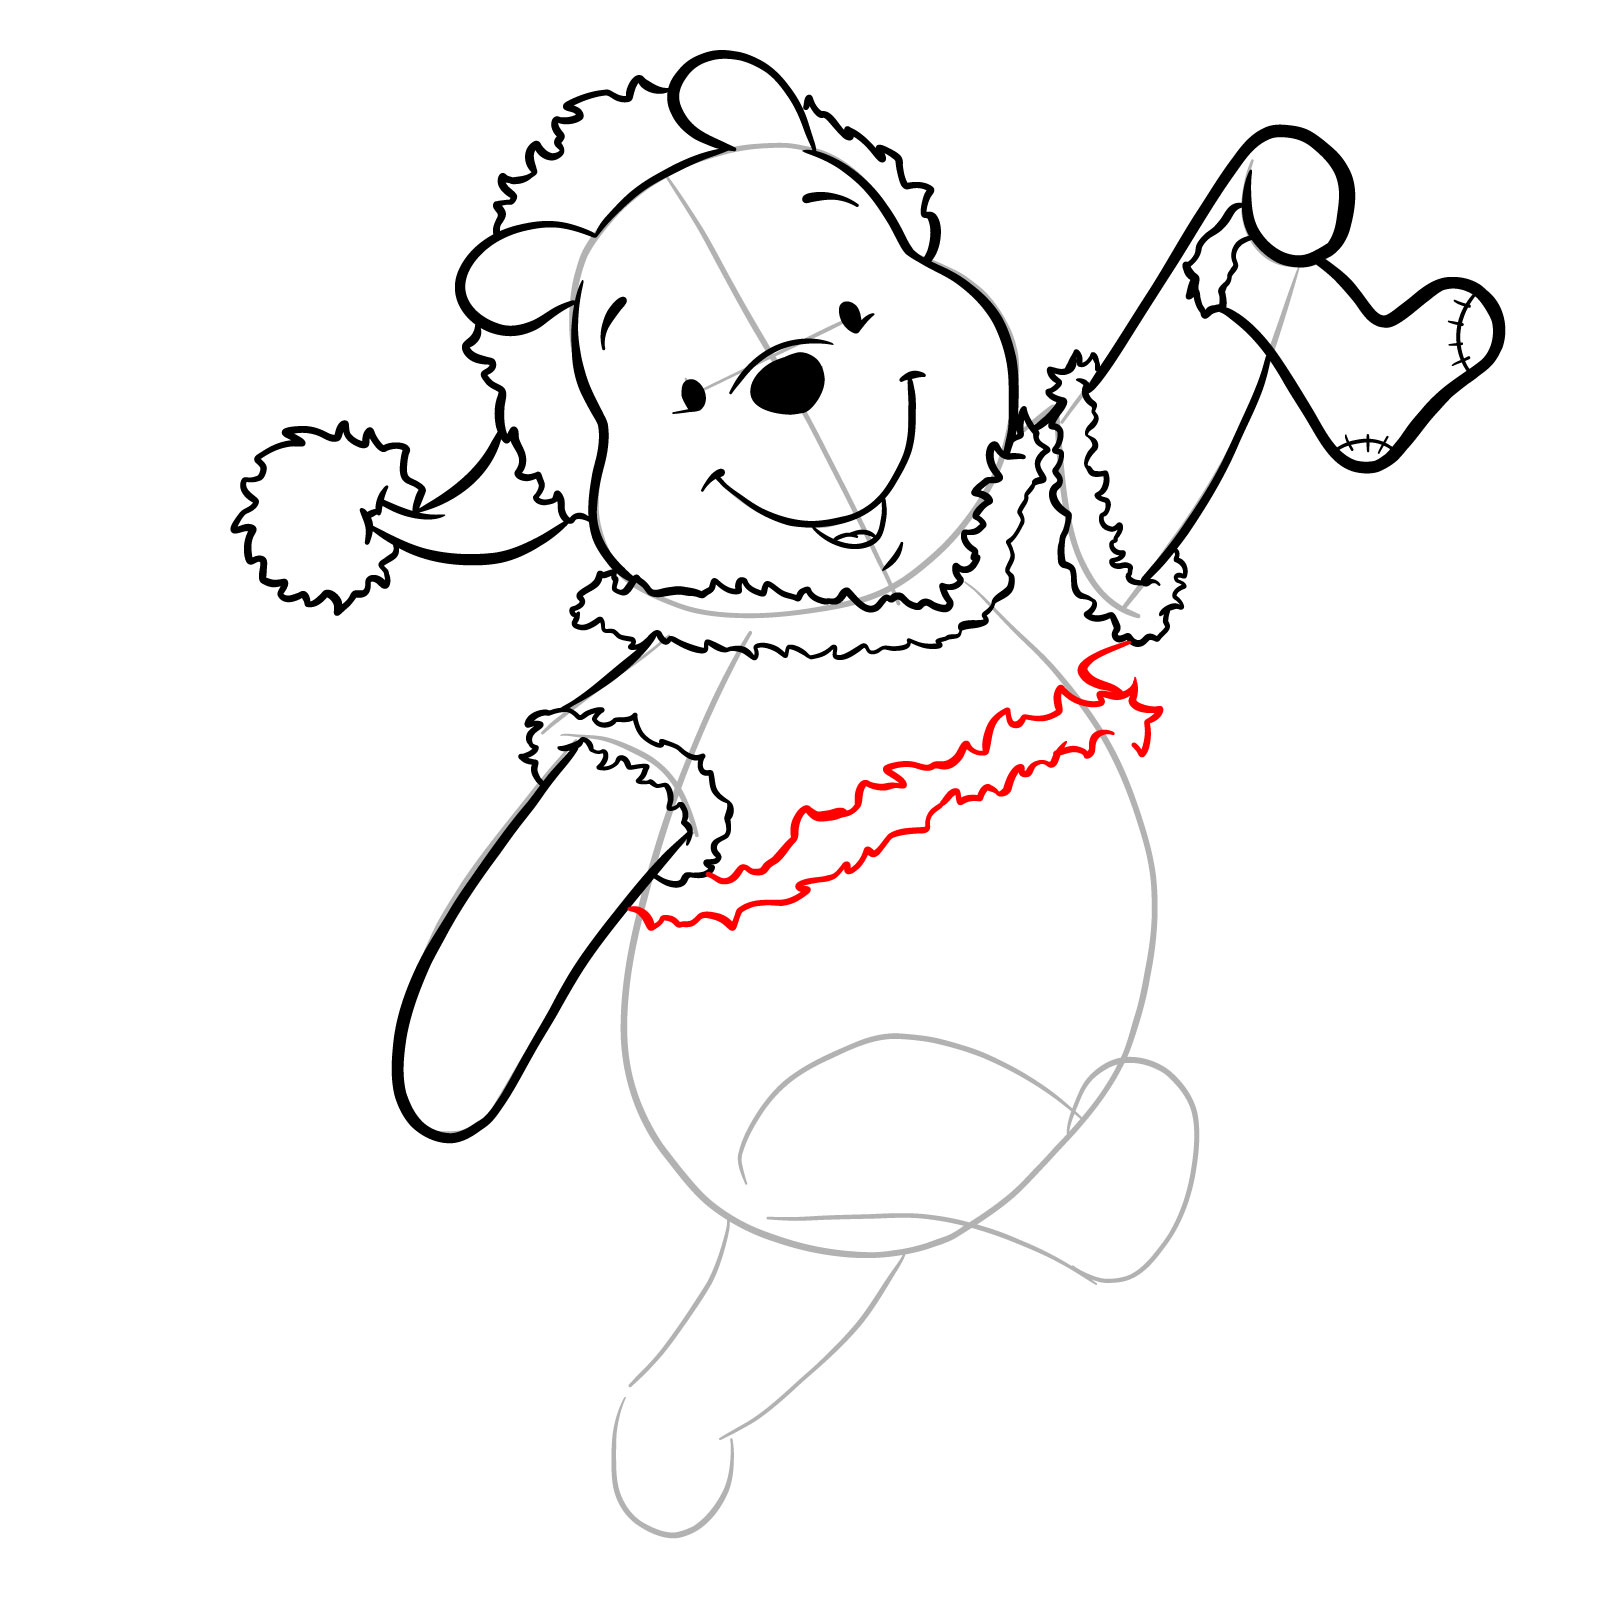 How to draw Winnie-the-Pooh Christmas style - step 22